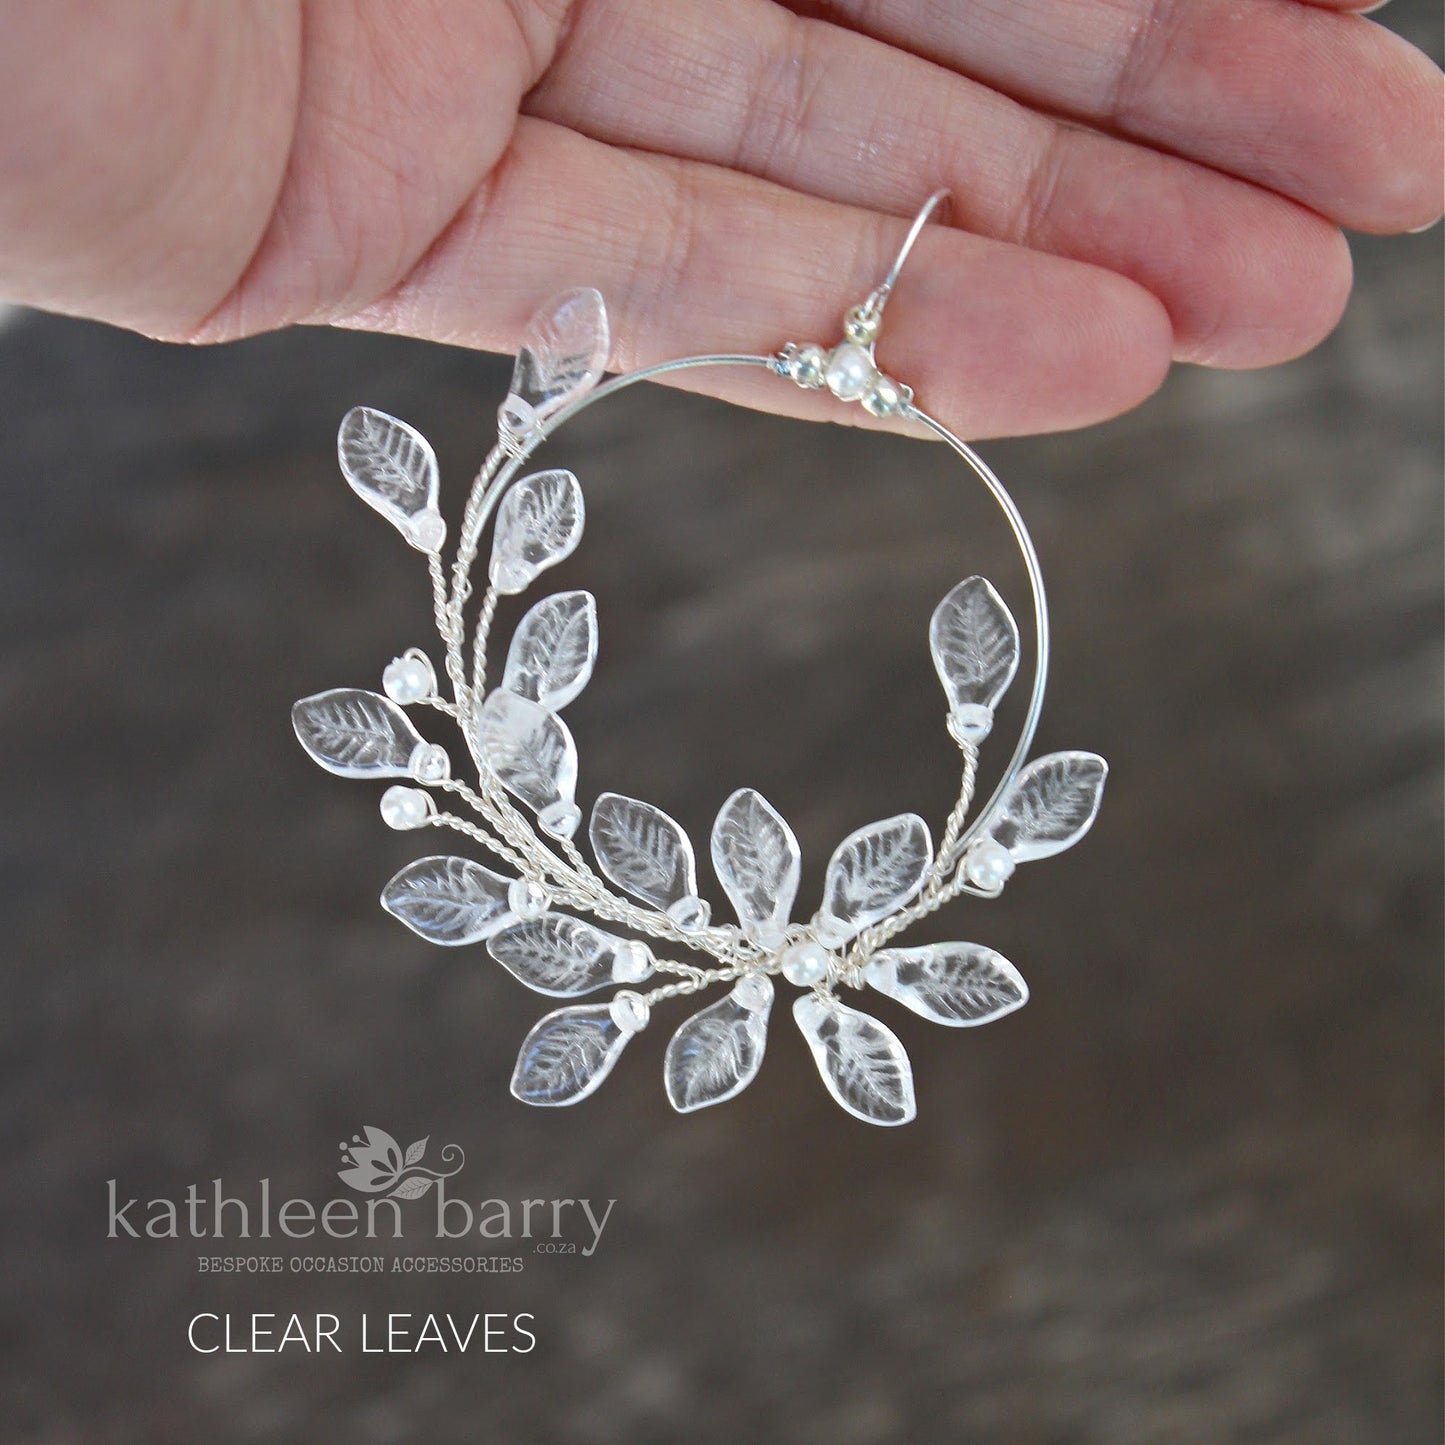 Statement Glass Leaf hoop earrings - Assorted finishes and leaf colors